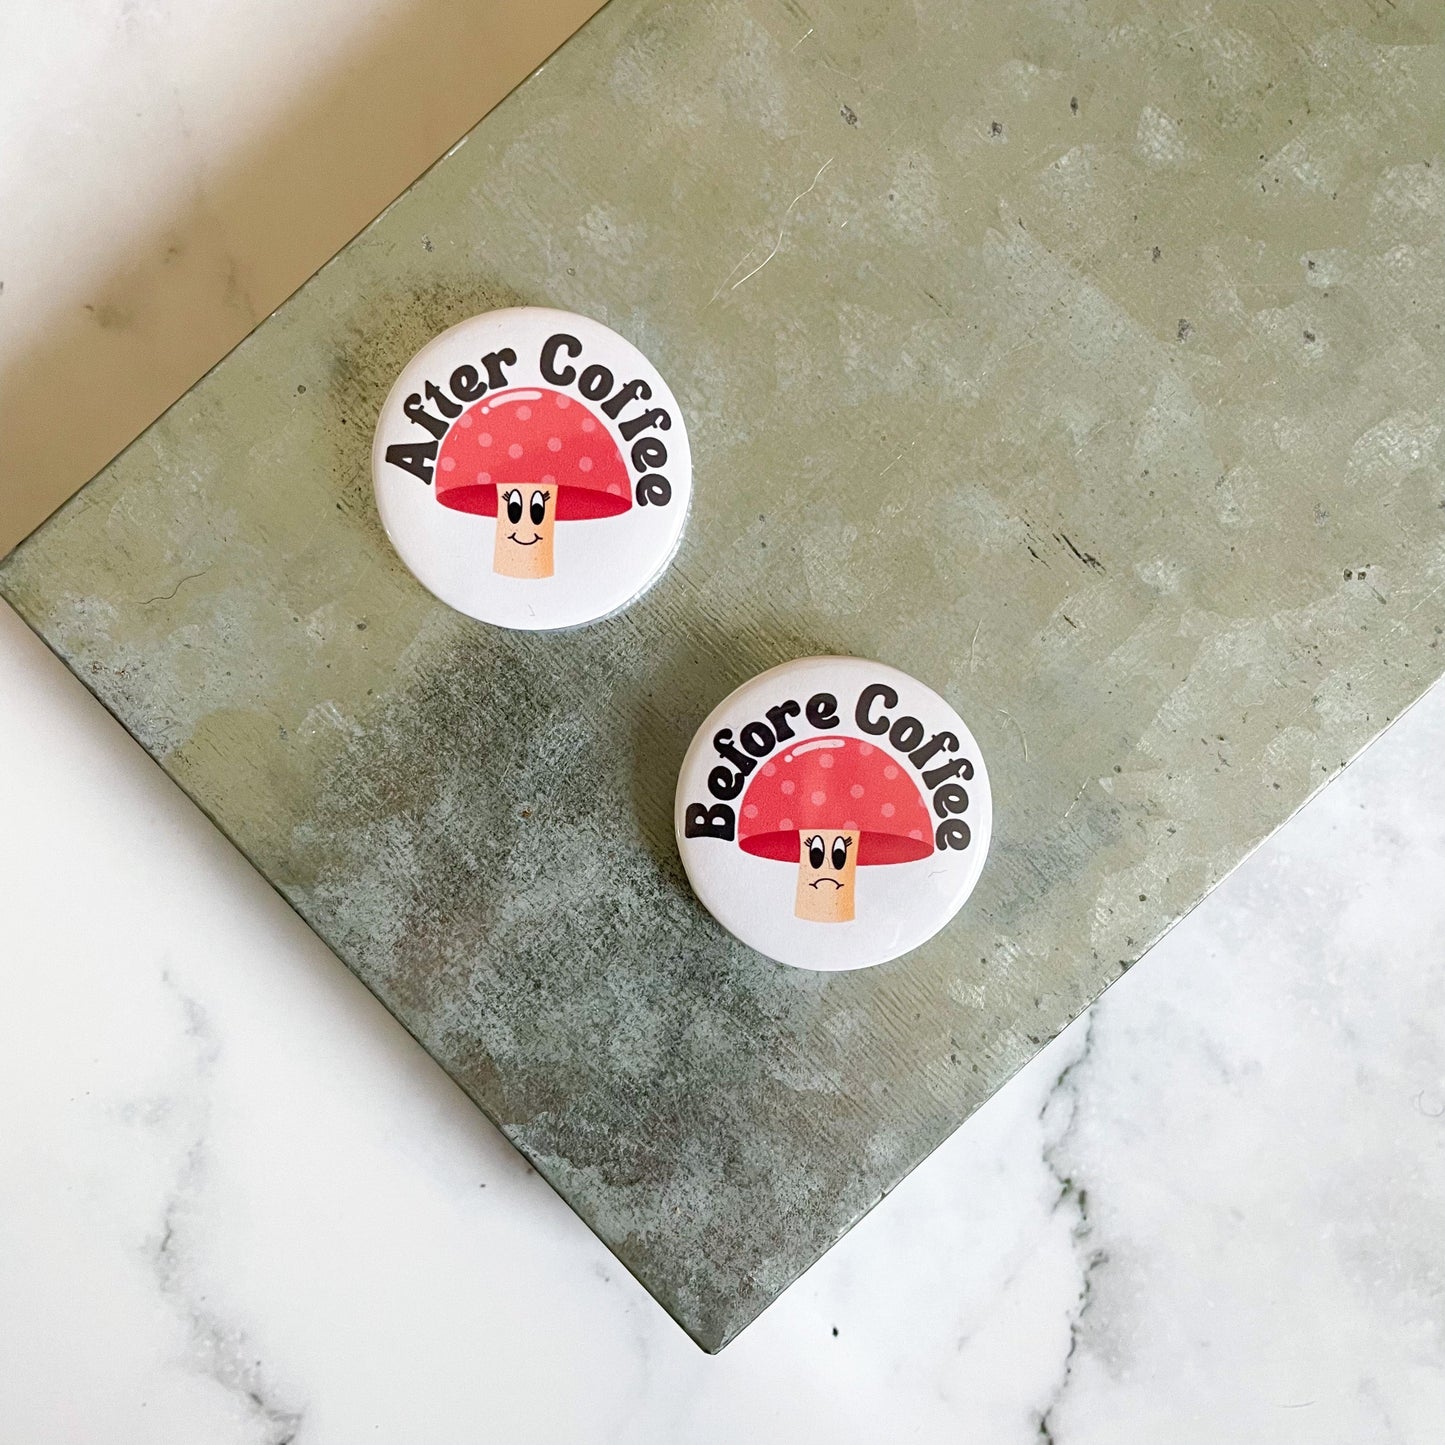 After Coffee Happy Mushroom Button / Badge (Buy 4 Get 1 FREE)